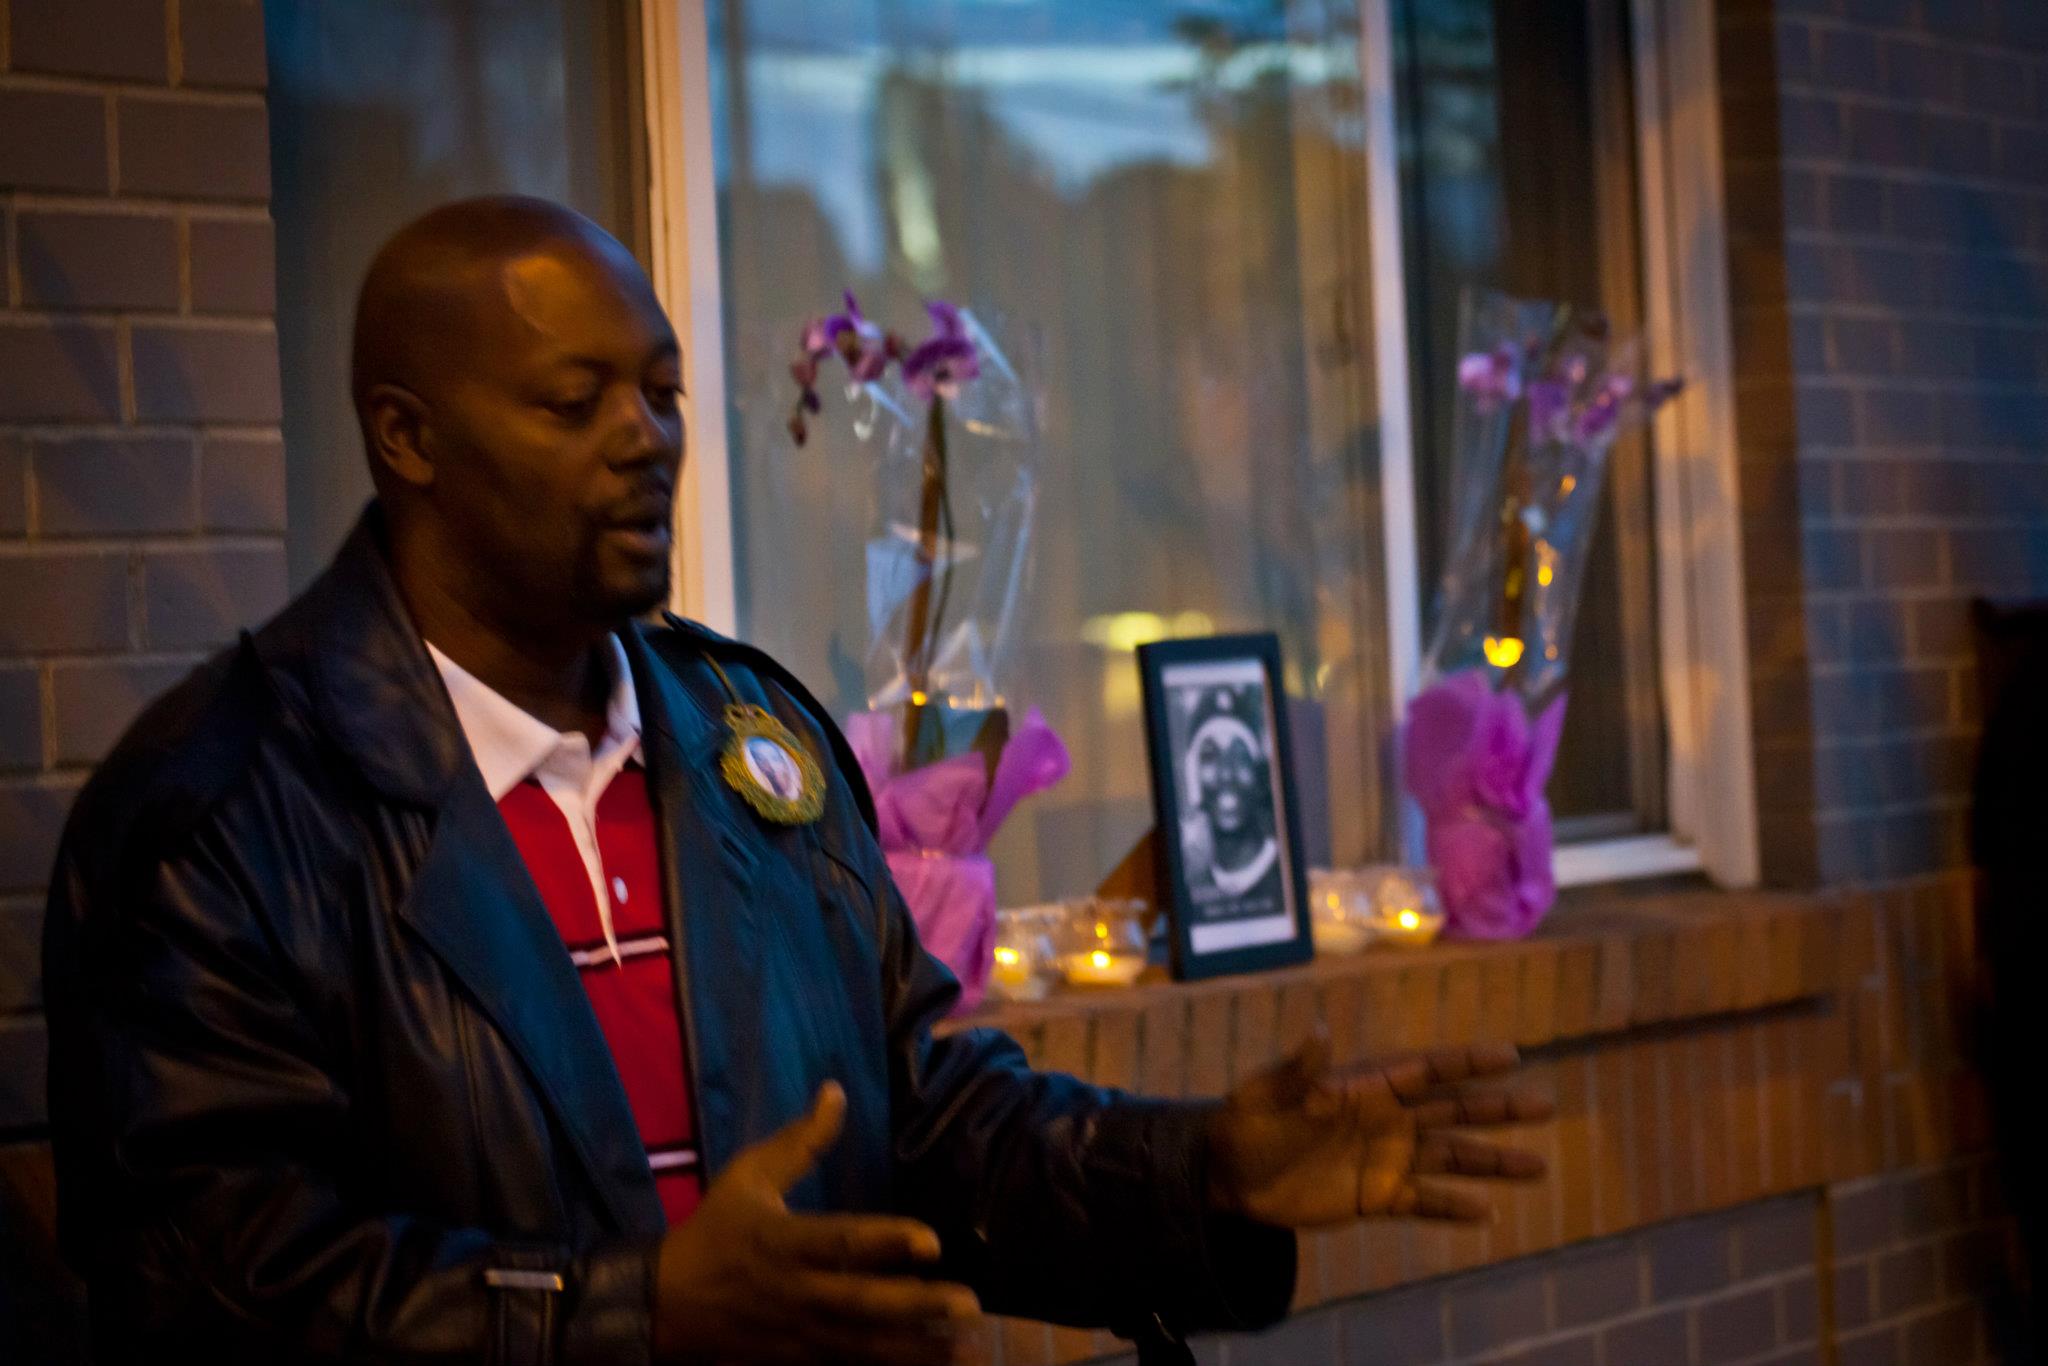 Image of Fred Bryant at monthly vigil he conducted for his son